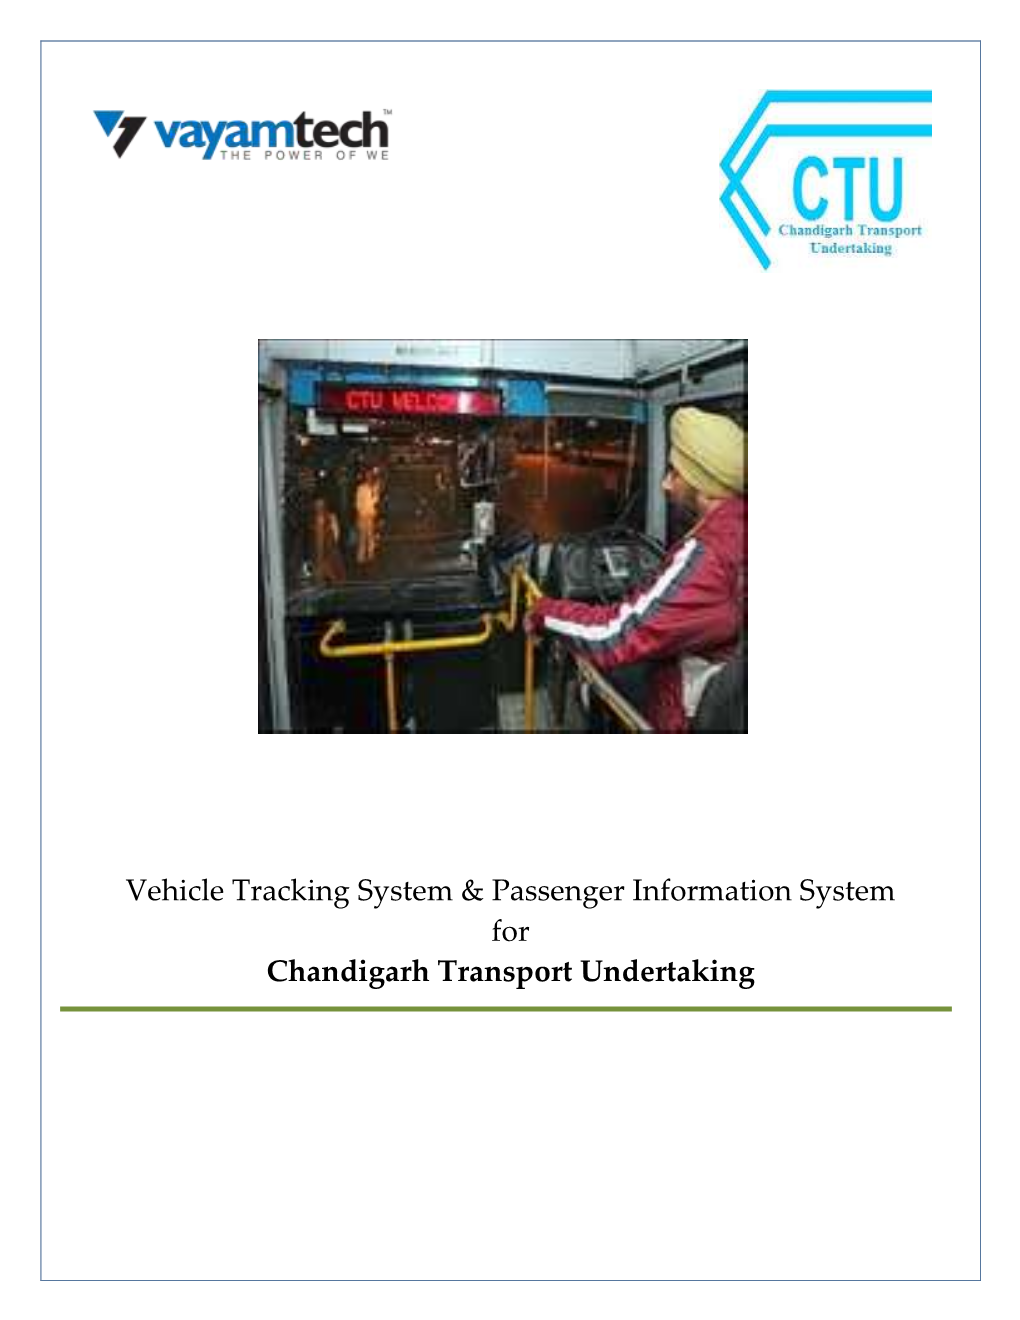 Vehicle Tracking System & Passenger Information System for Chandigarh